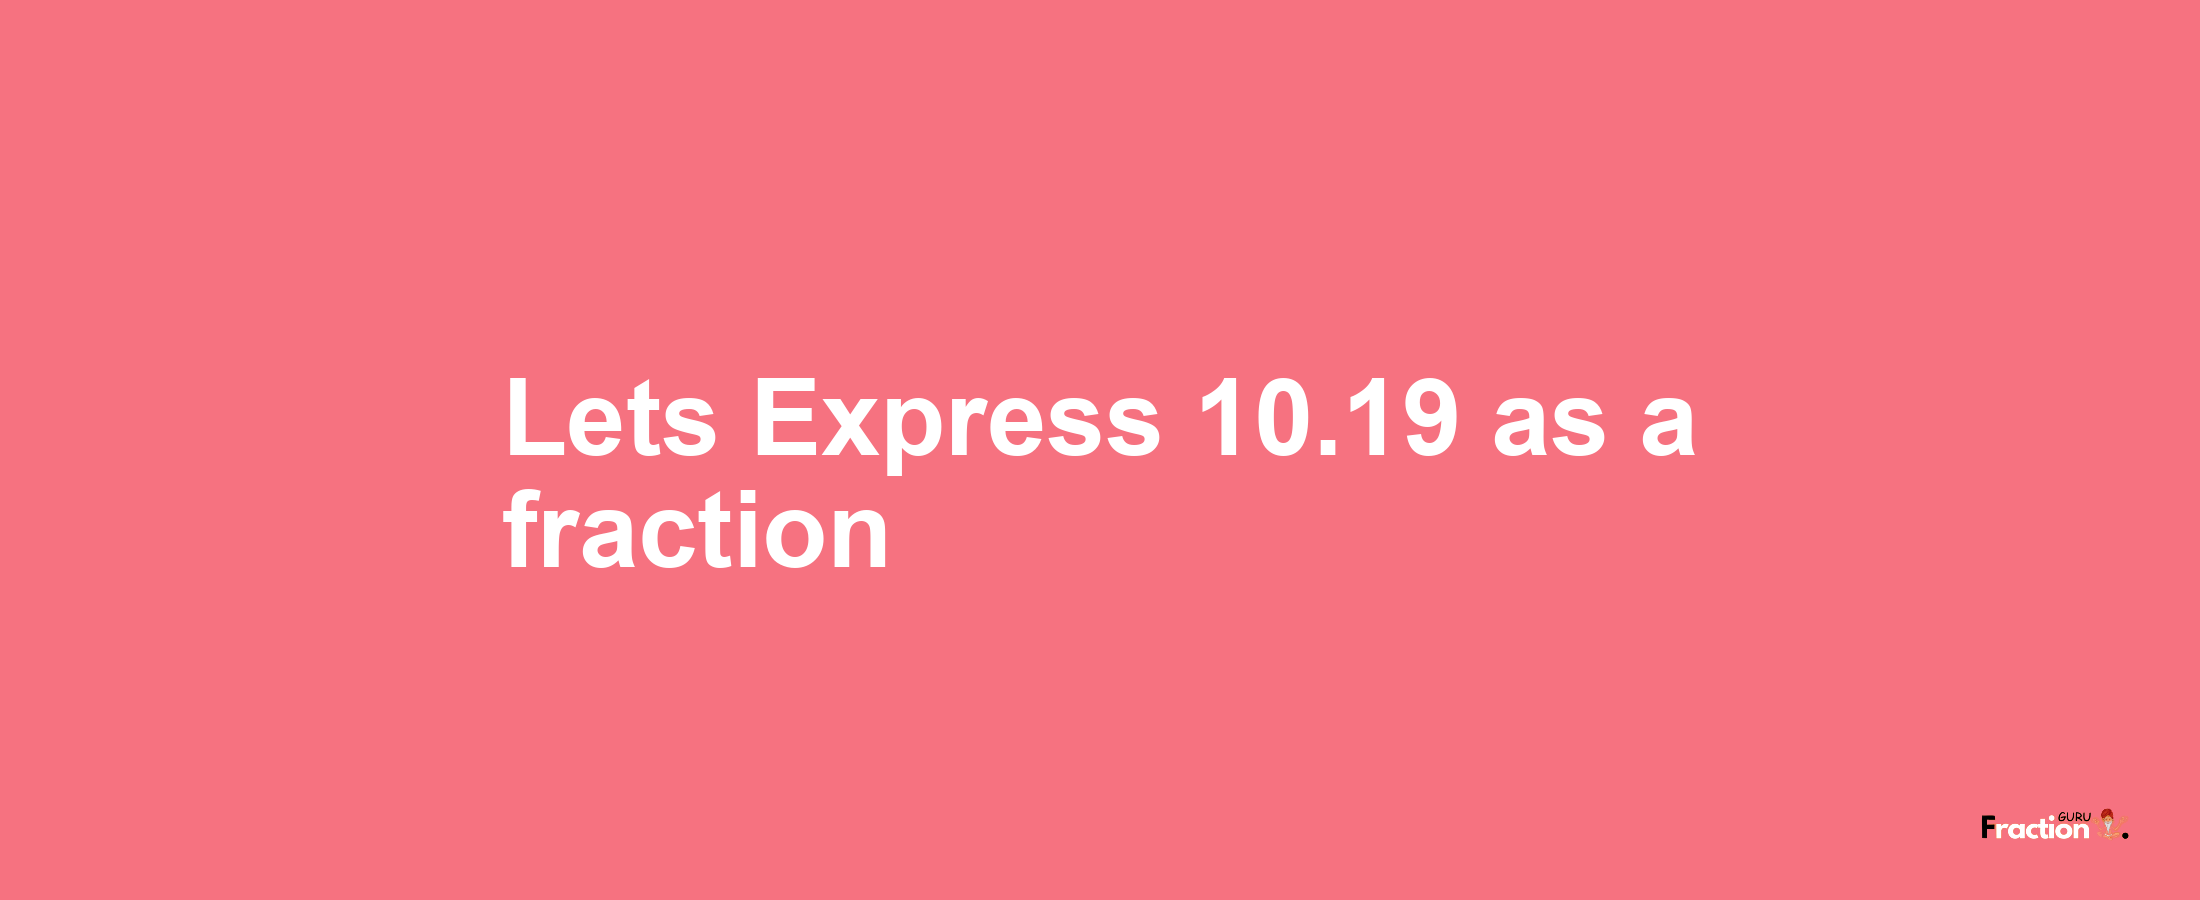 Lets Express 10.19 as afraction